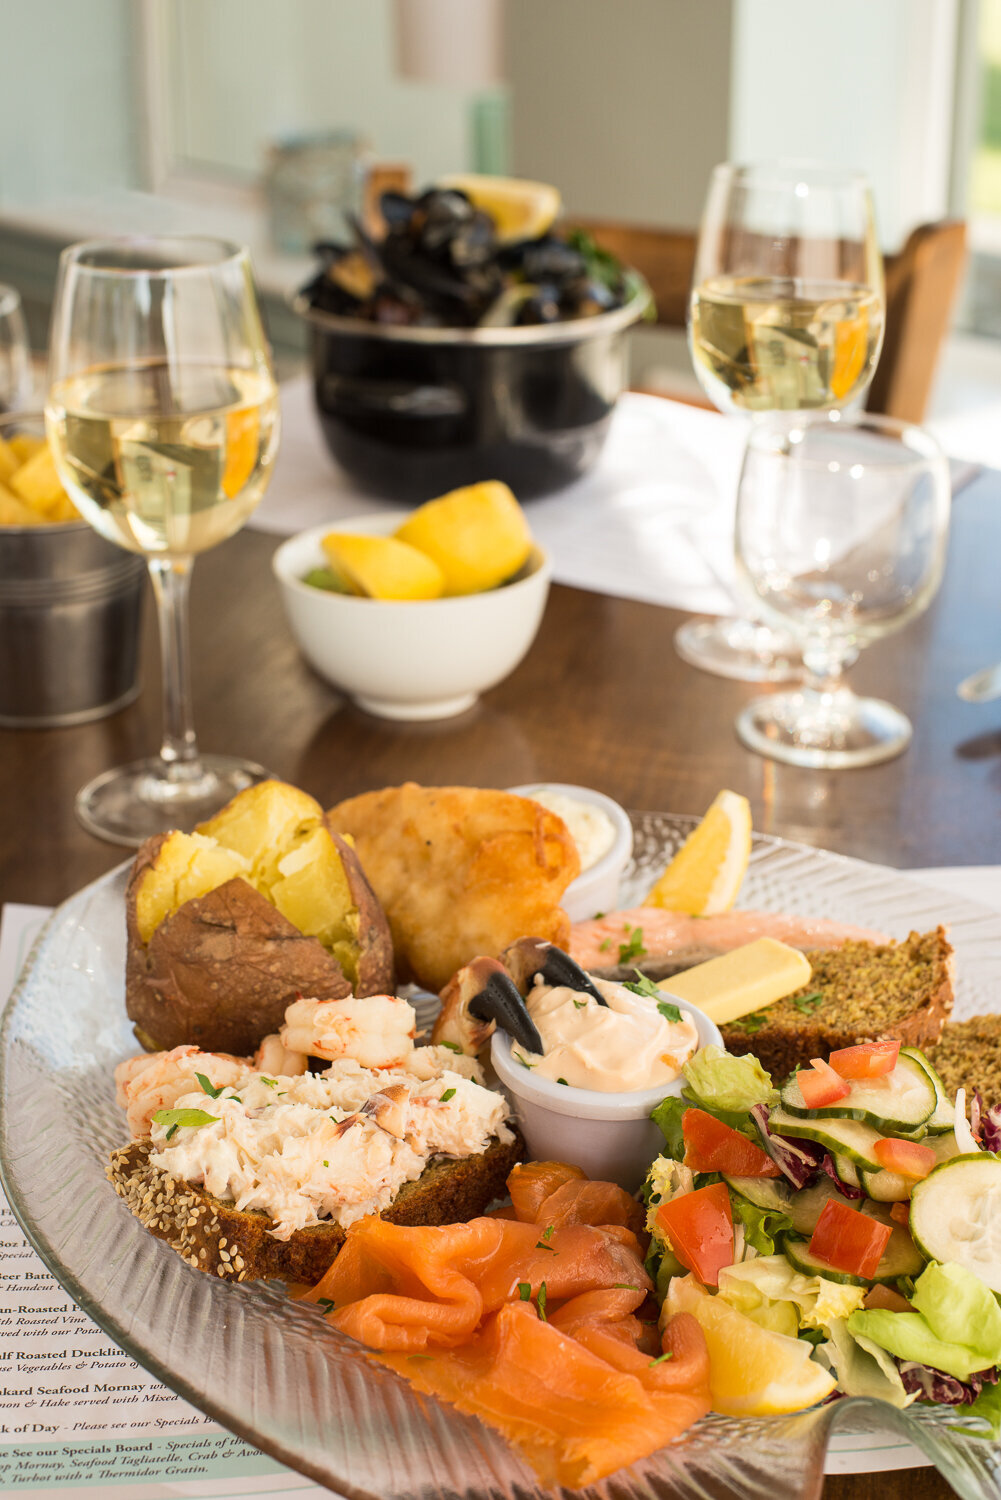 Colourful seafood platter for two with crab claws and salmon